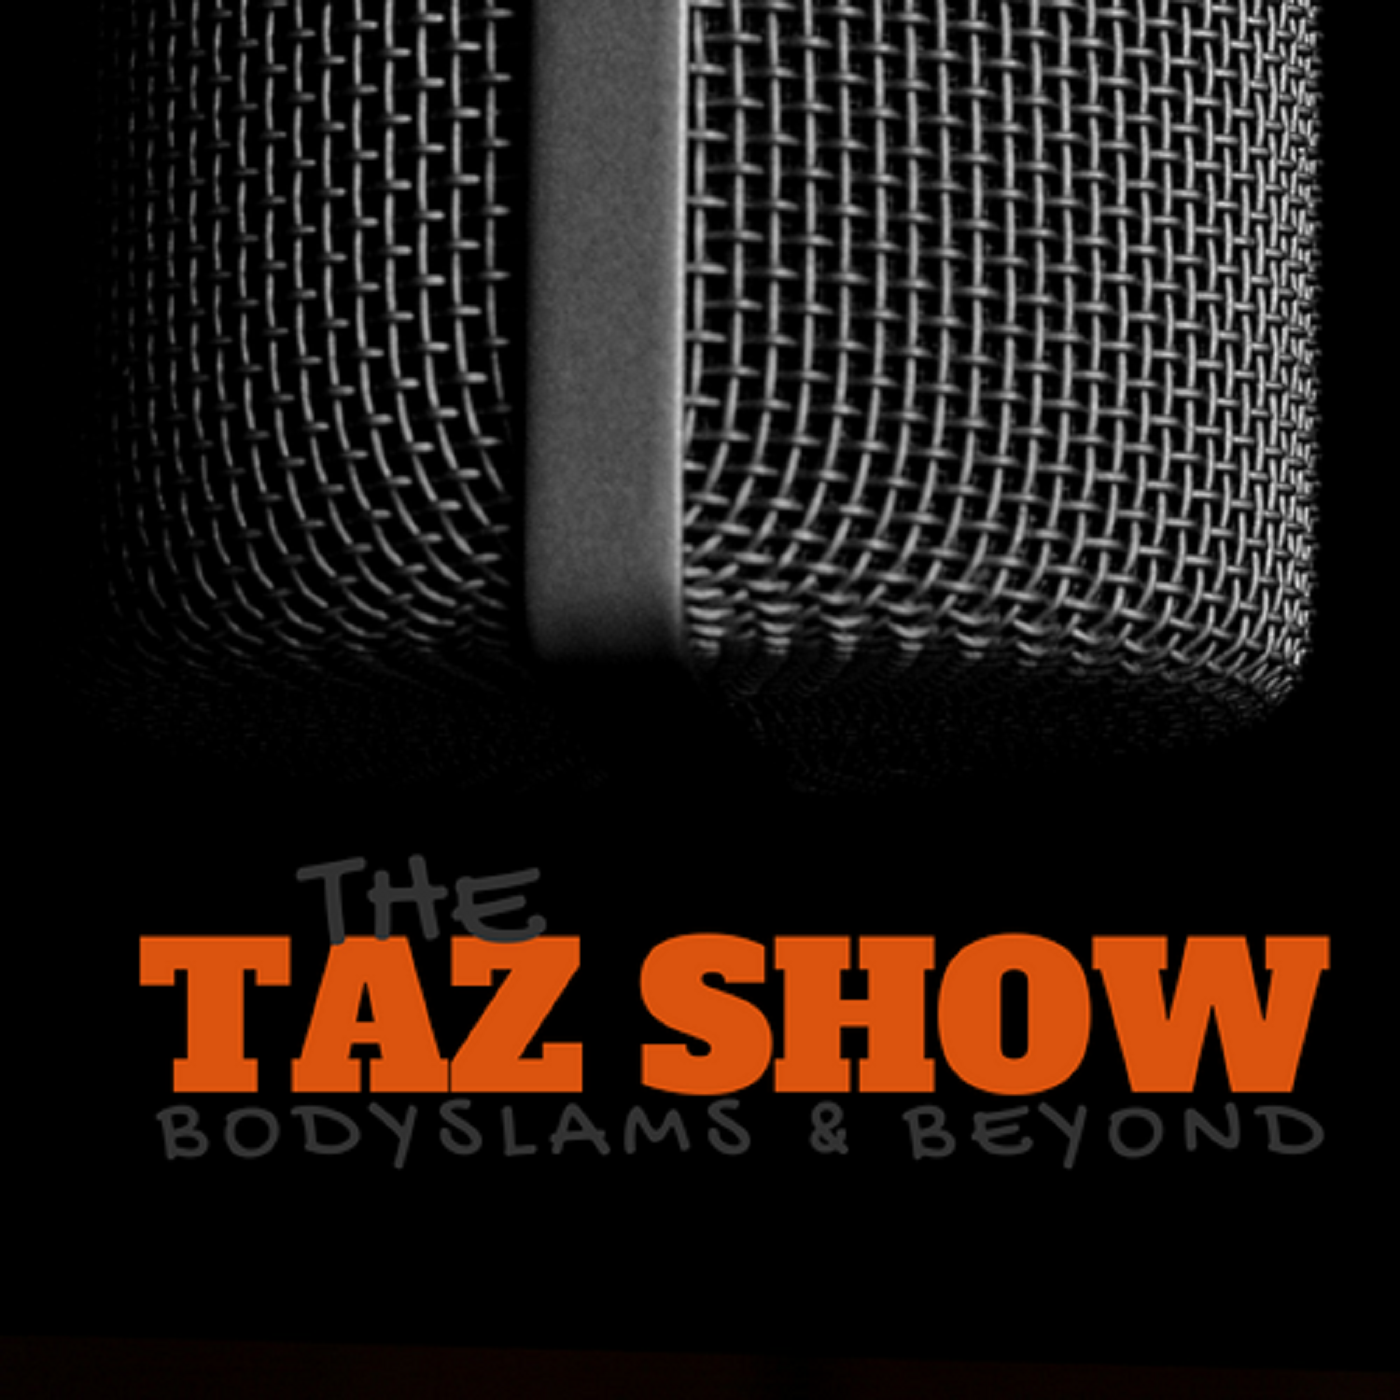 The Taz Show Day 5!